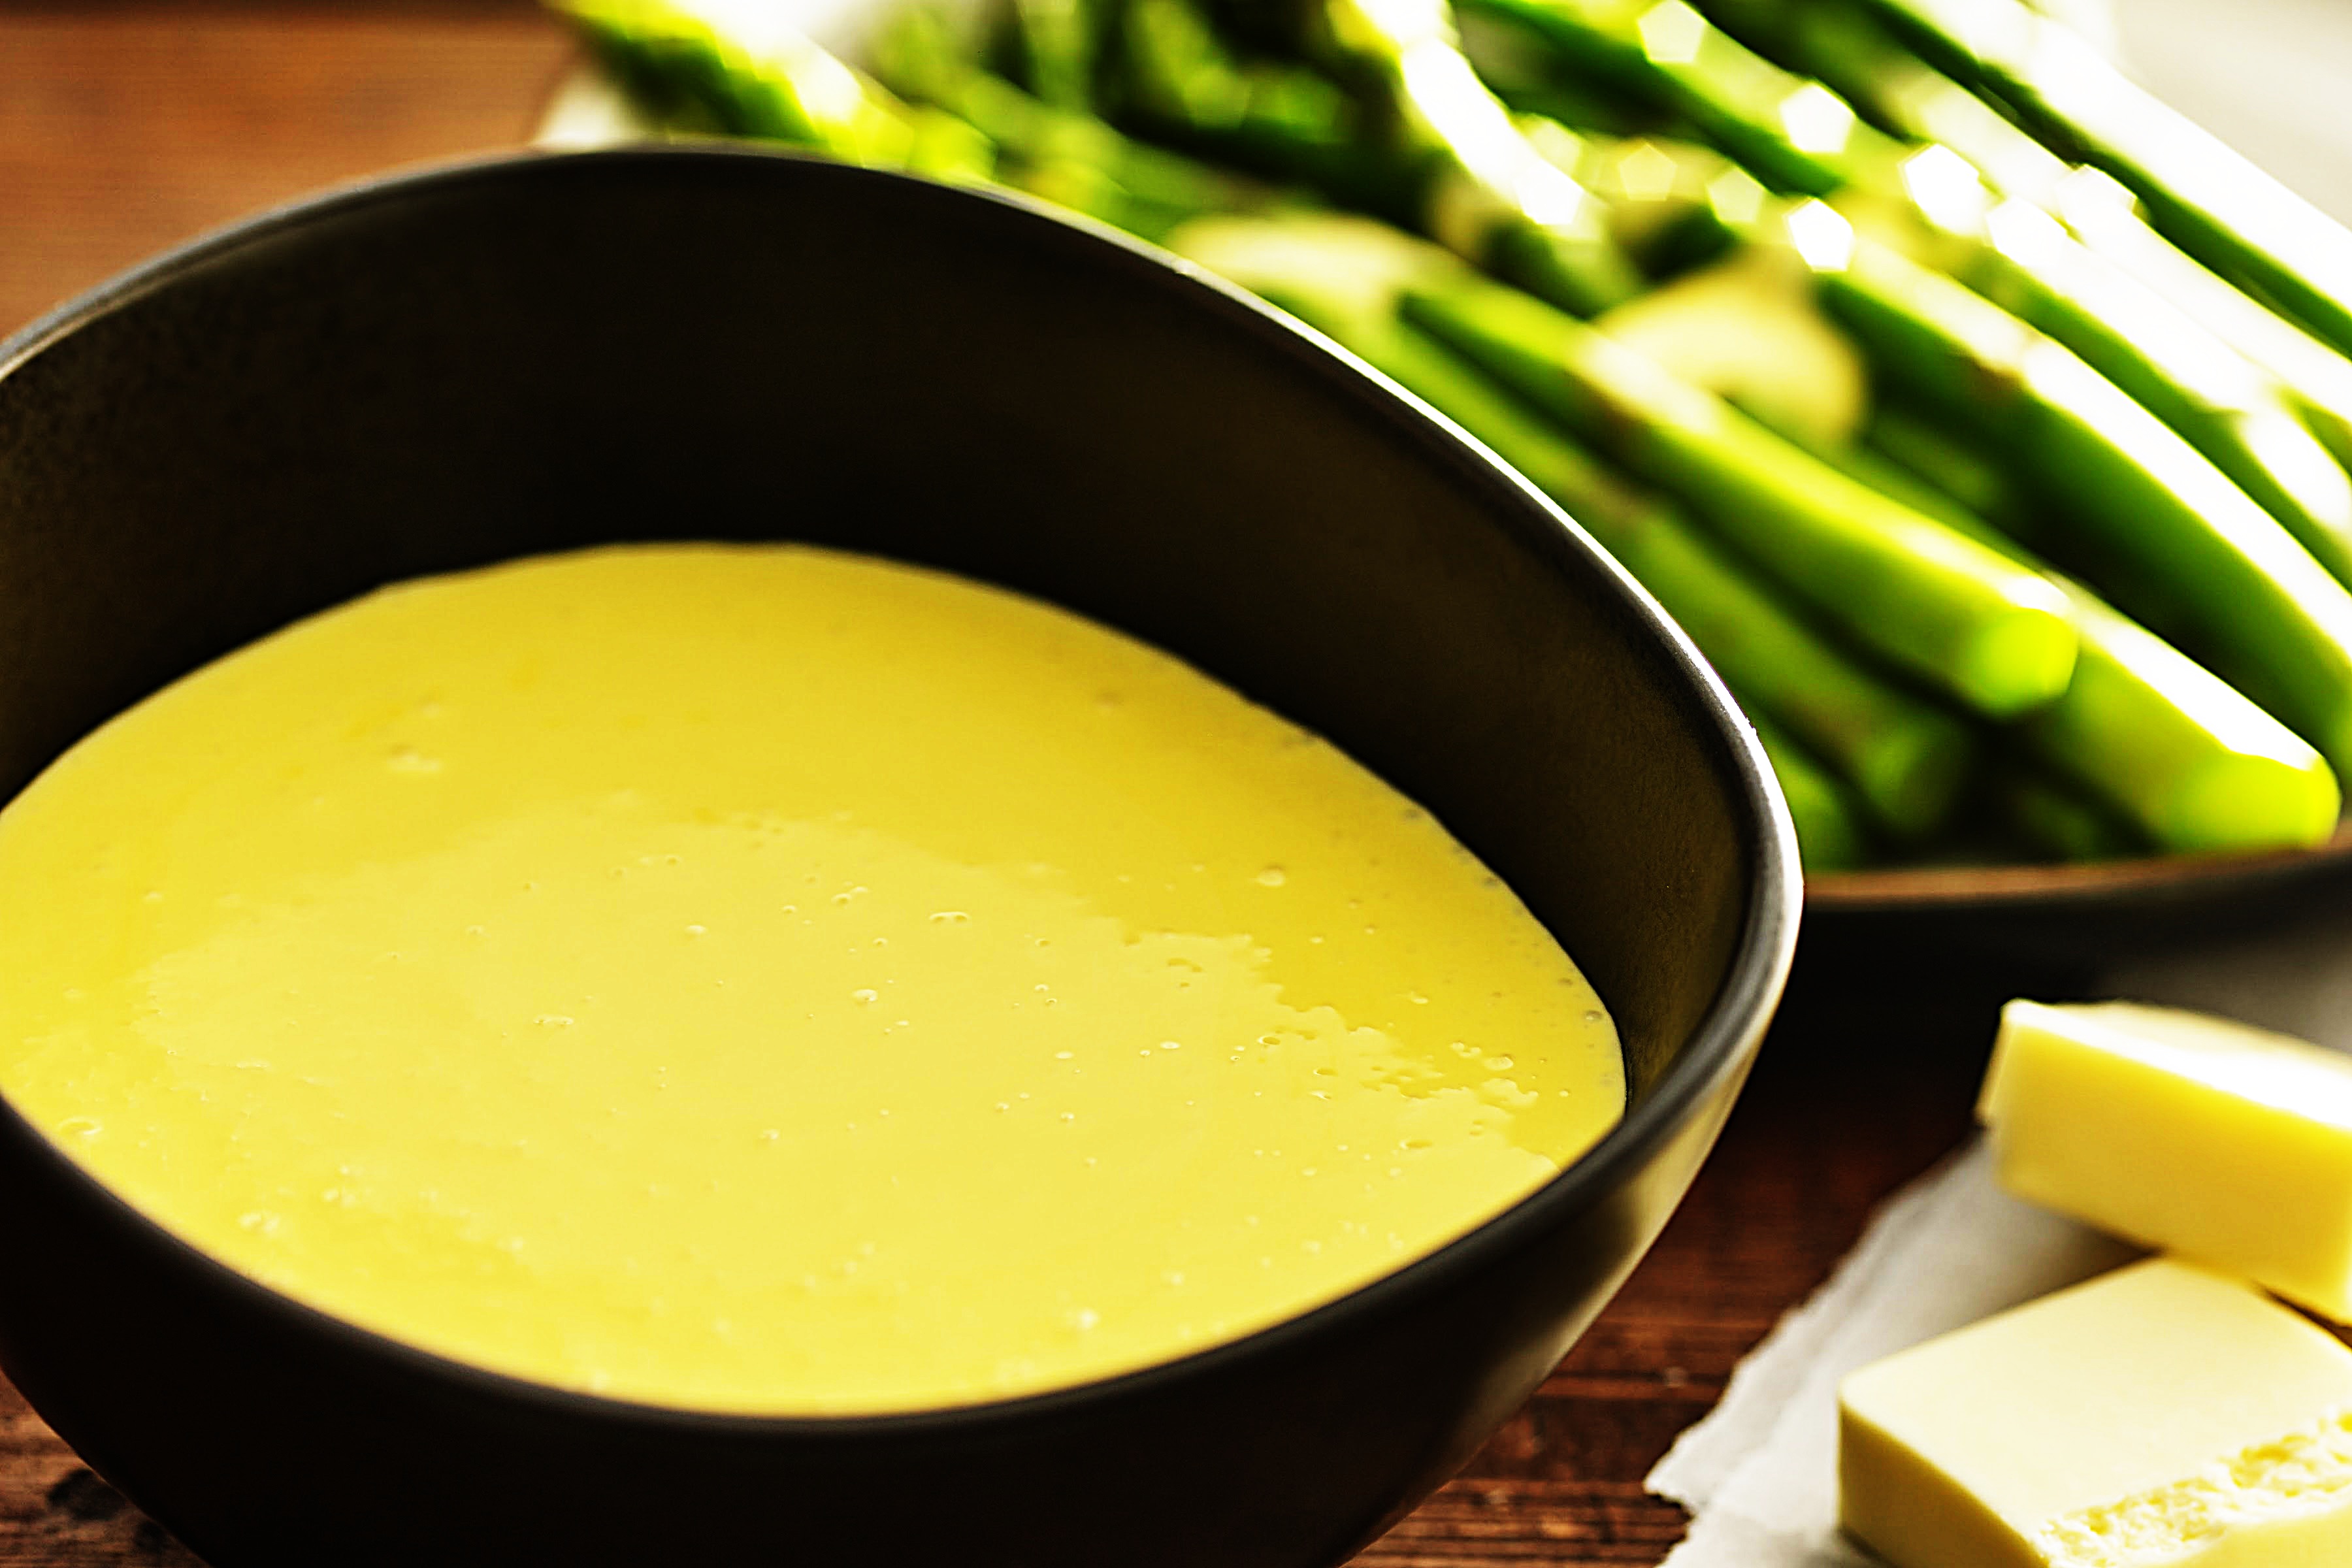 Stupid-Easy Recipe for Hollandaise Sauce (#1 Top-Rated)